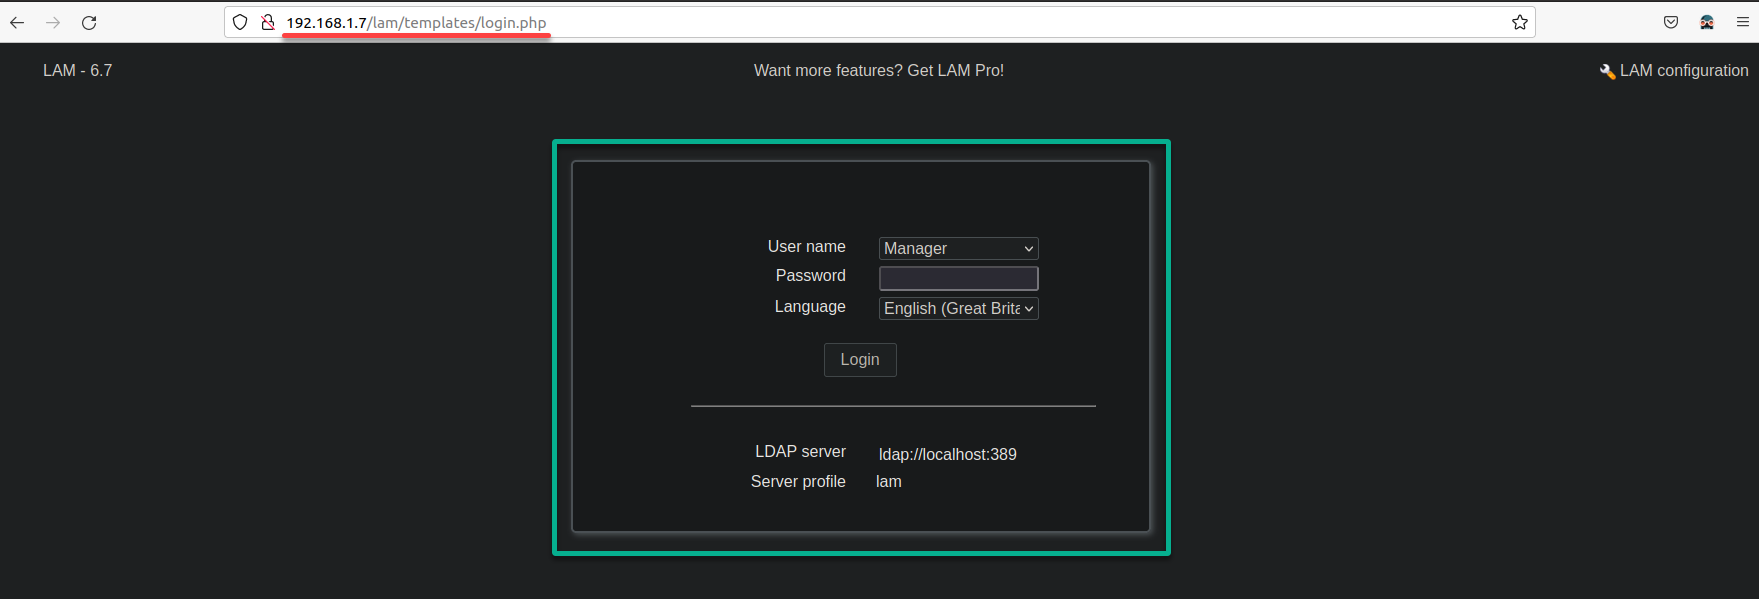 Accessing the LAM web interface